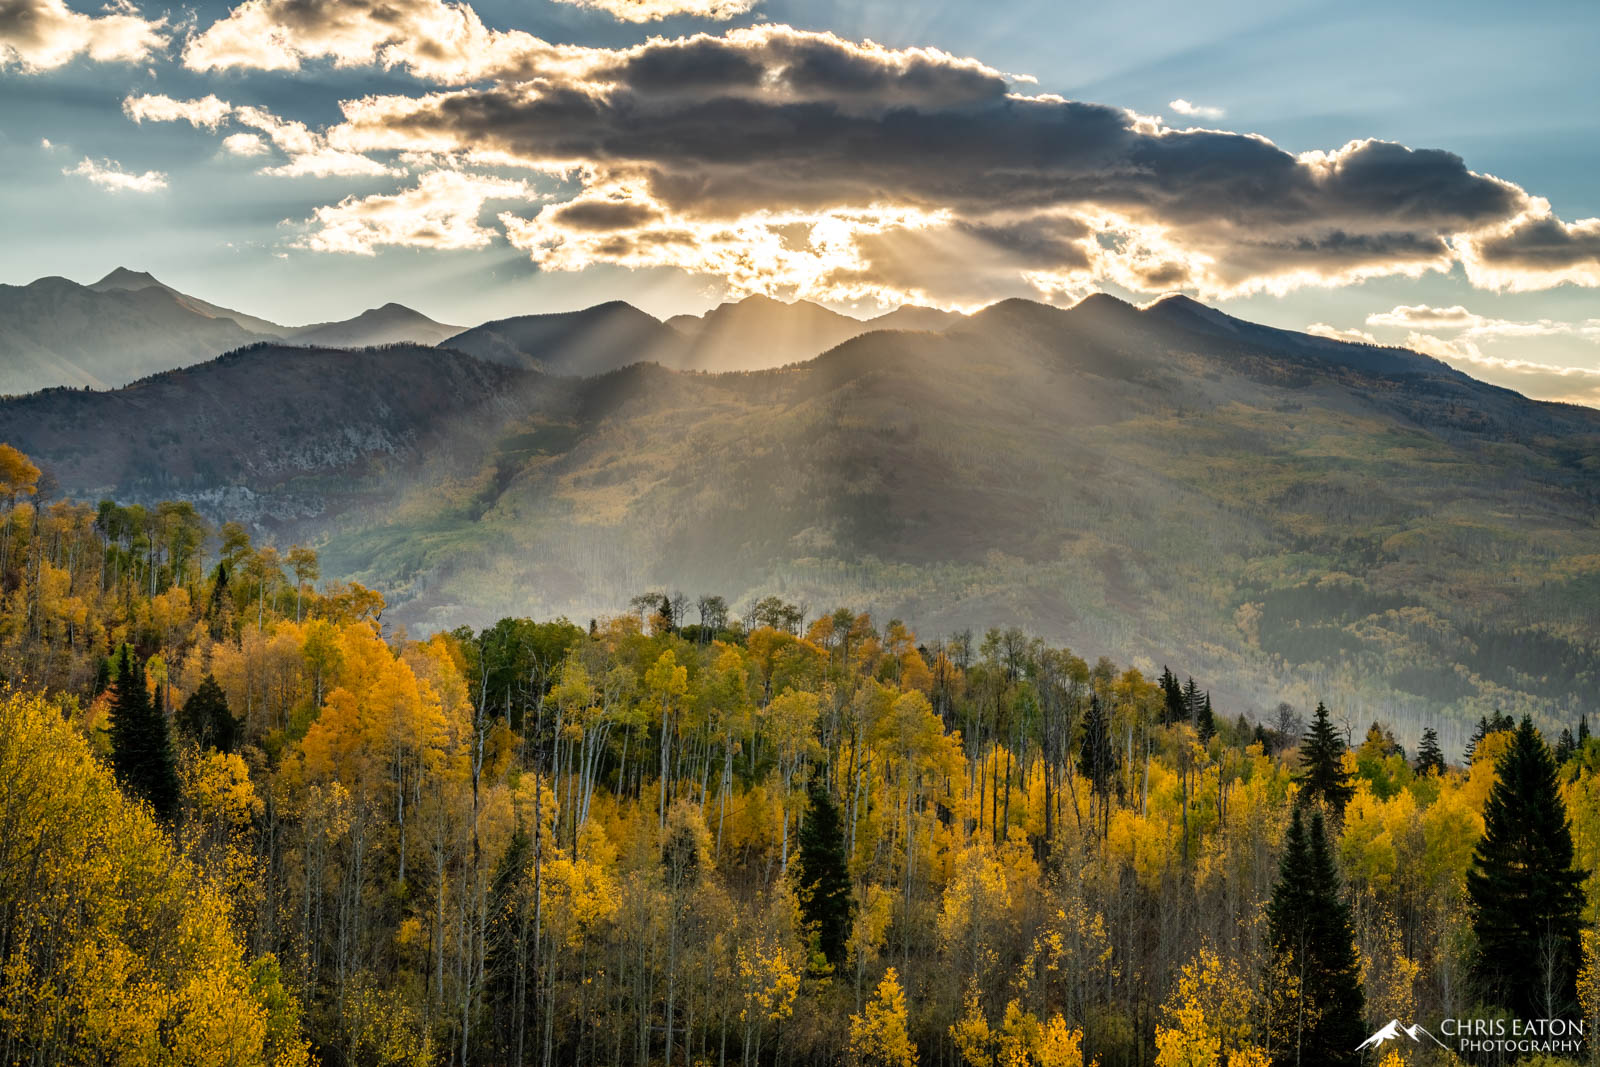 Early morning sunlight filters through the clouds over the Elk Mountains, illuminating the stands of Quaking Aspen (Populus tremuloides...